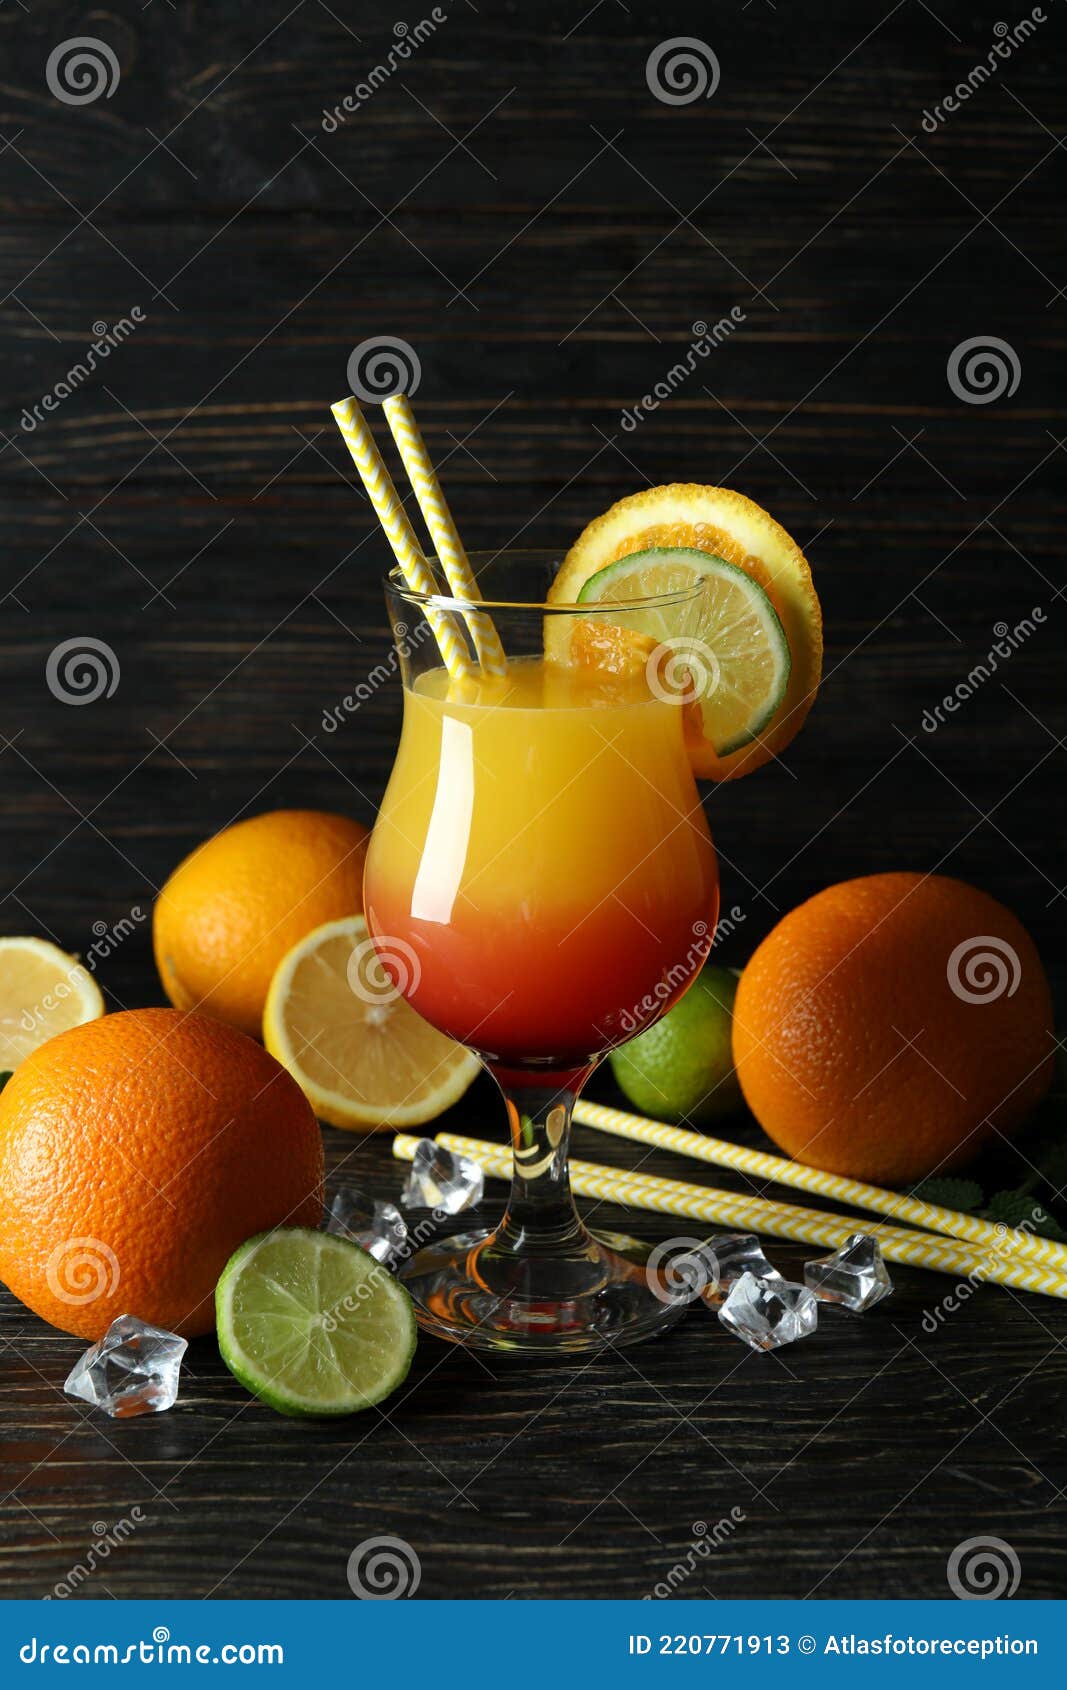 Tequila Sunrise Cocktail and Ingredients on Wooden Table Stock Image ...